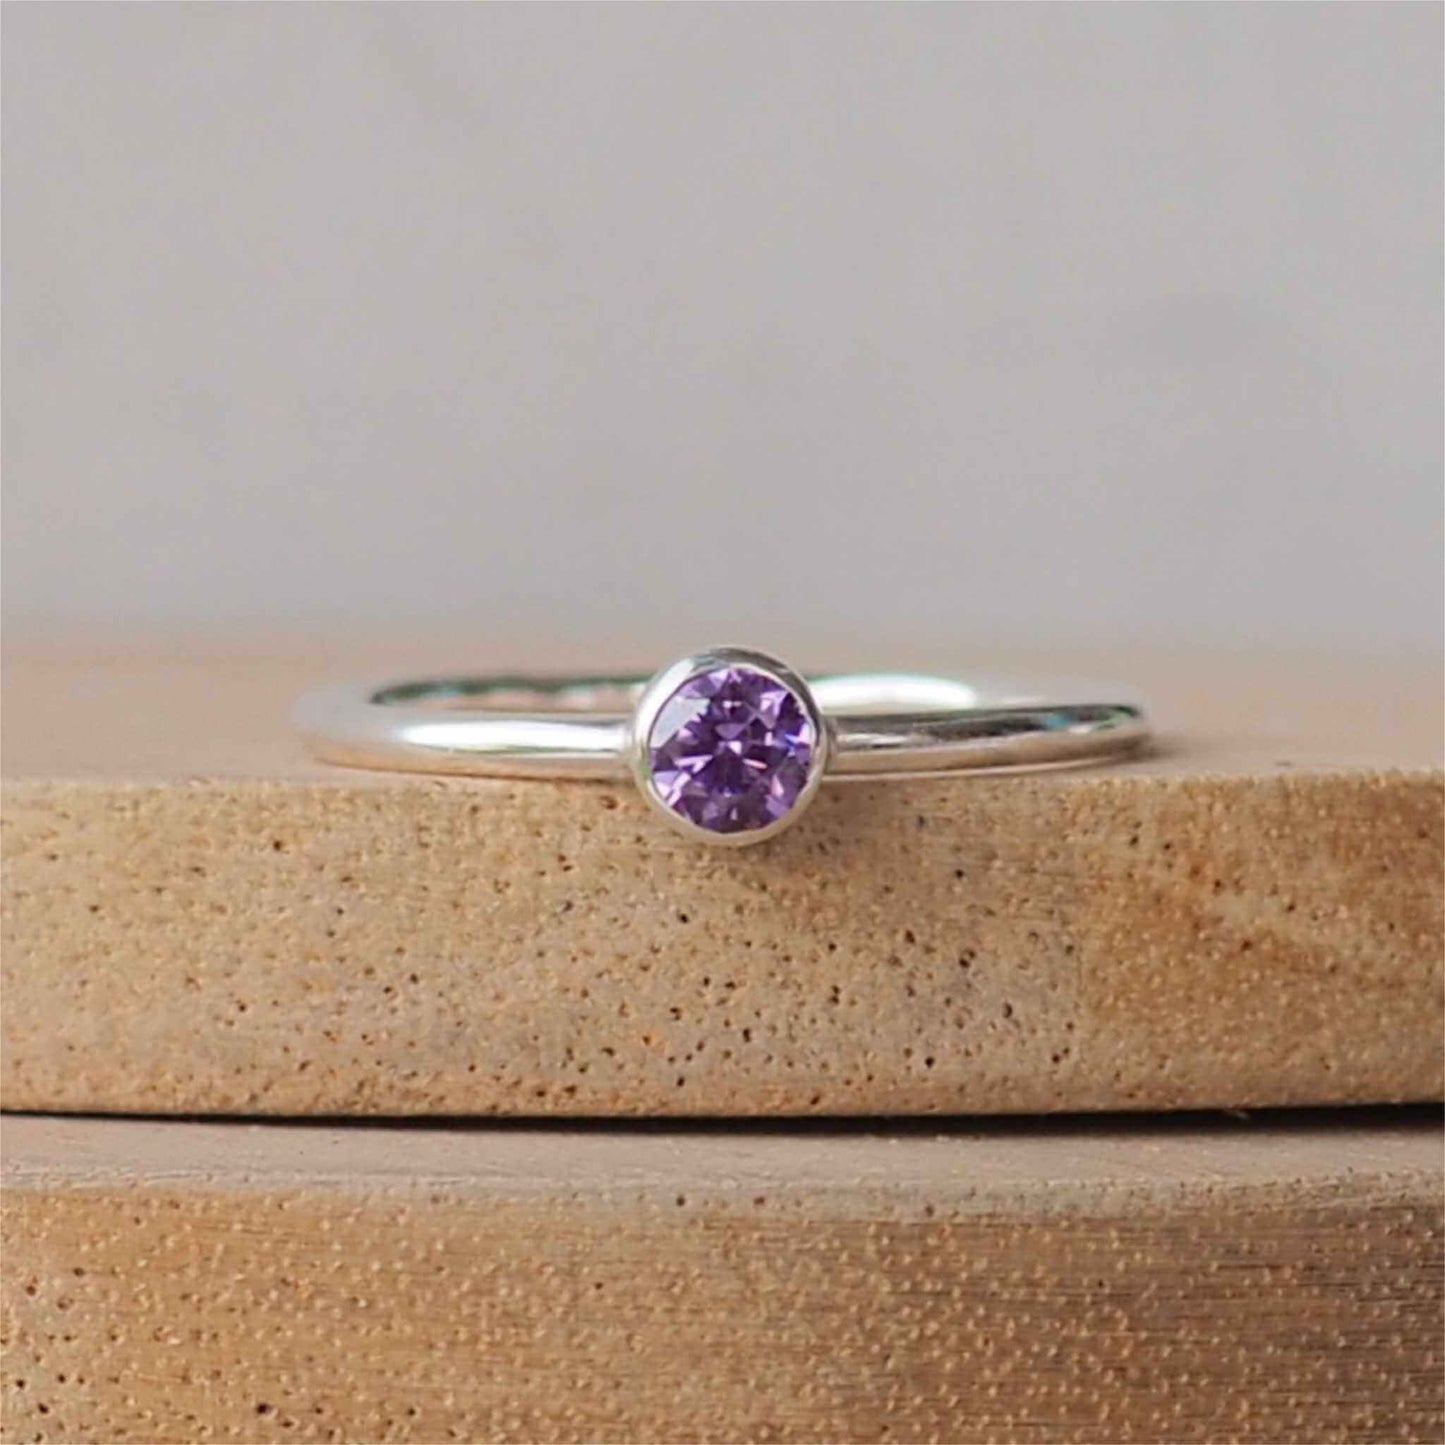 Sparkly Purple and silver gemstone ring made from amethyst Cubic zirconia and Sterling Silver. THe ring in very simple in style with a 4mm round gemstone set in a silver surround on a modern halo band. Handmade in Scotland by maram jewellery